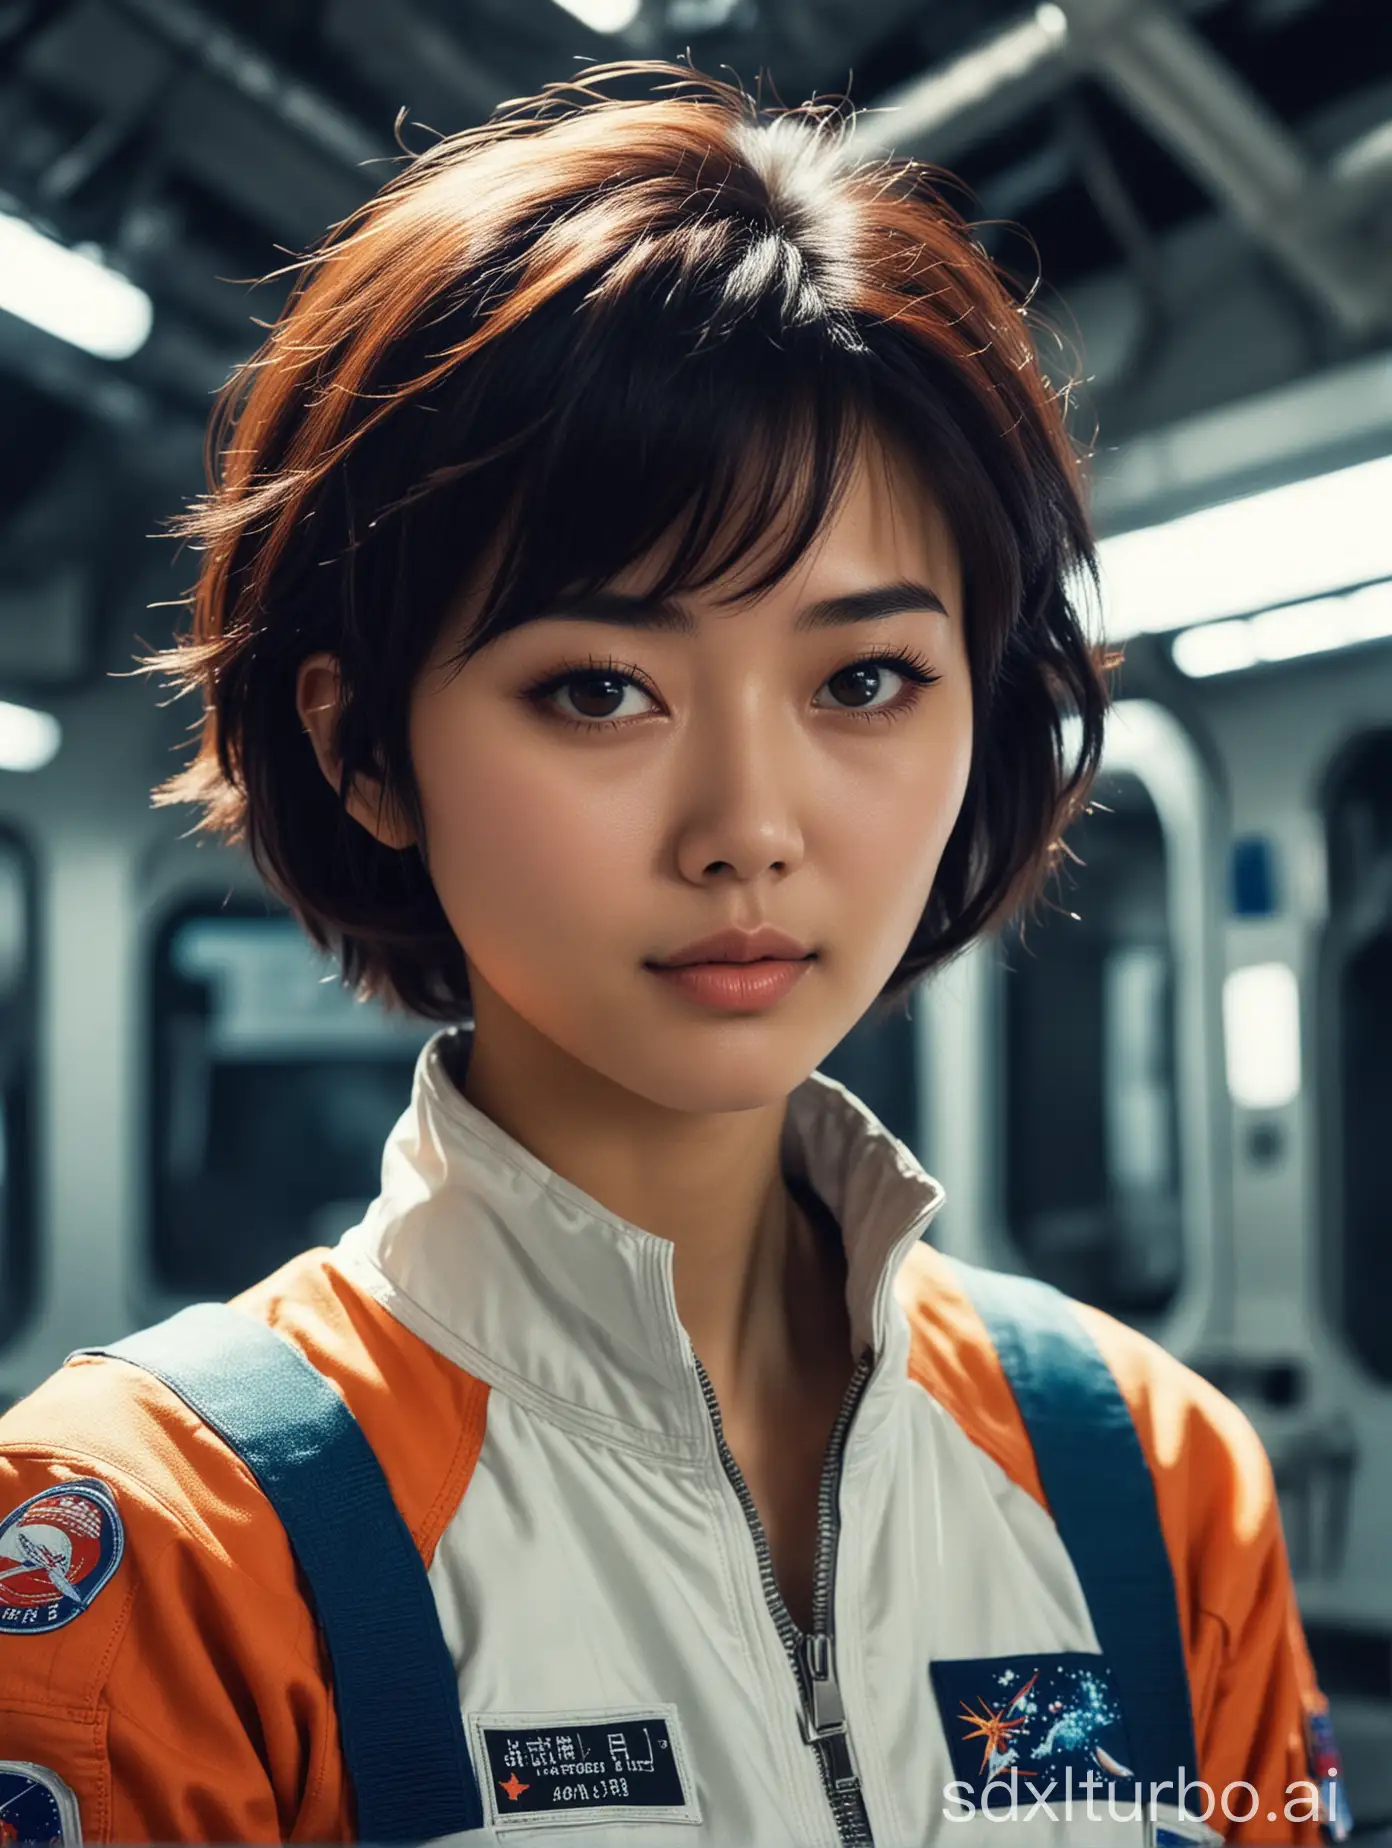 Chinese-Girl-Astronaut-with-80s-Tech-at-Alternative-Future-Space-Center